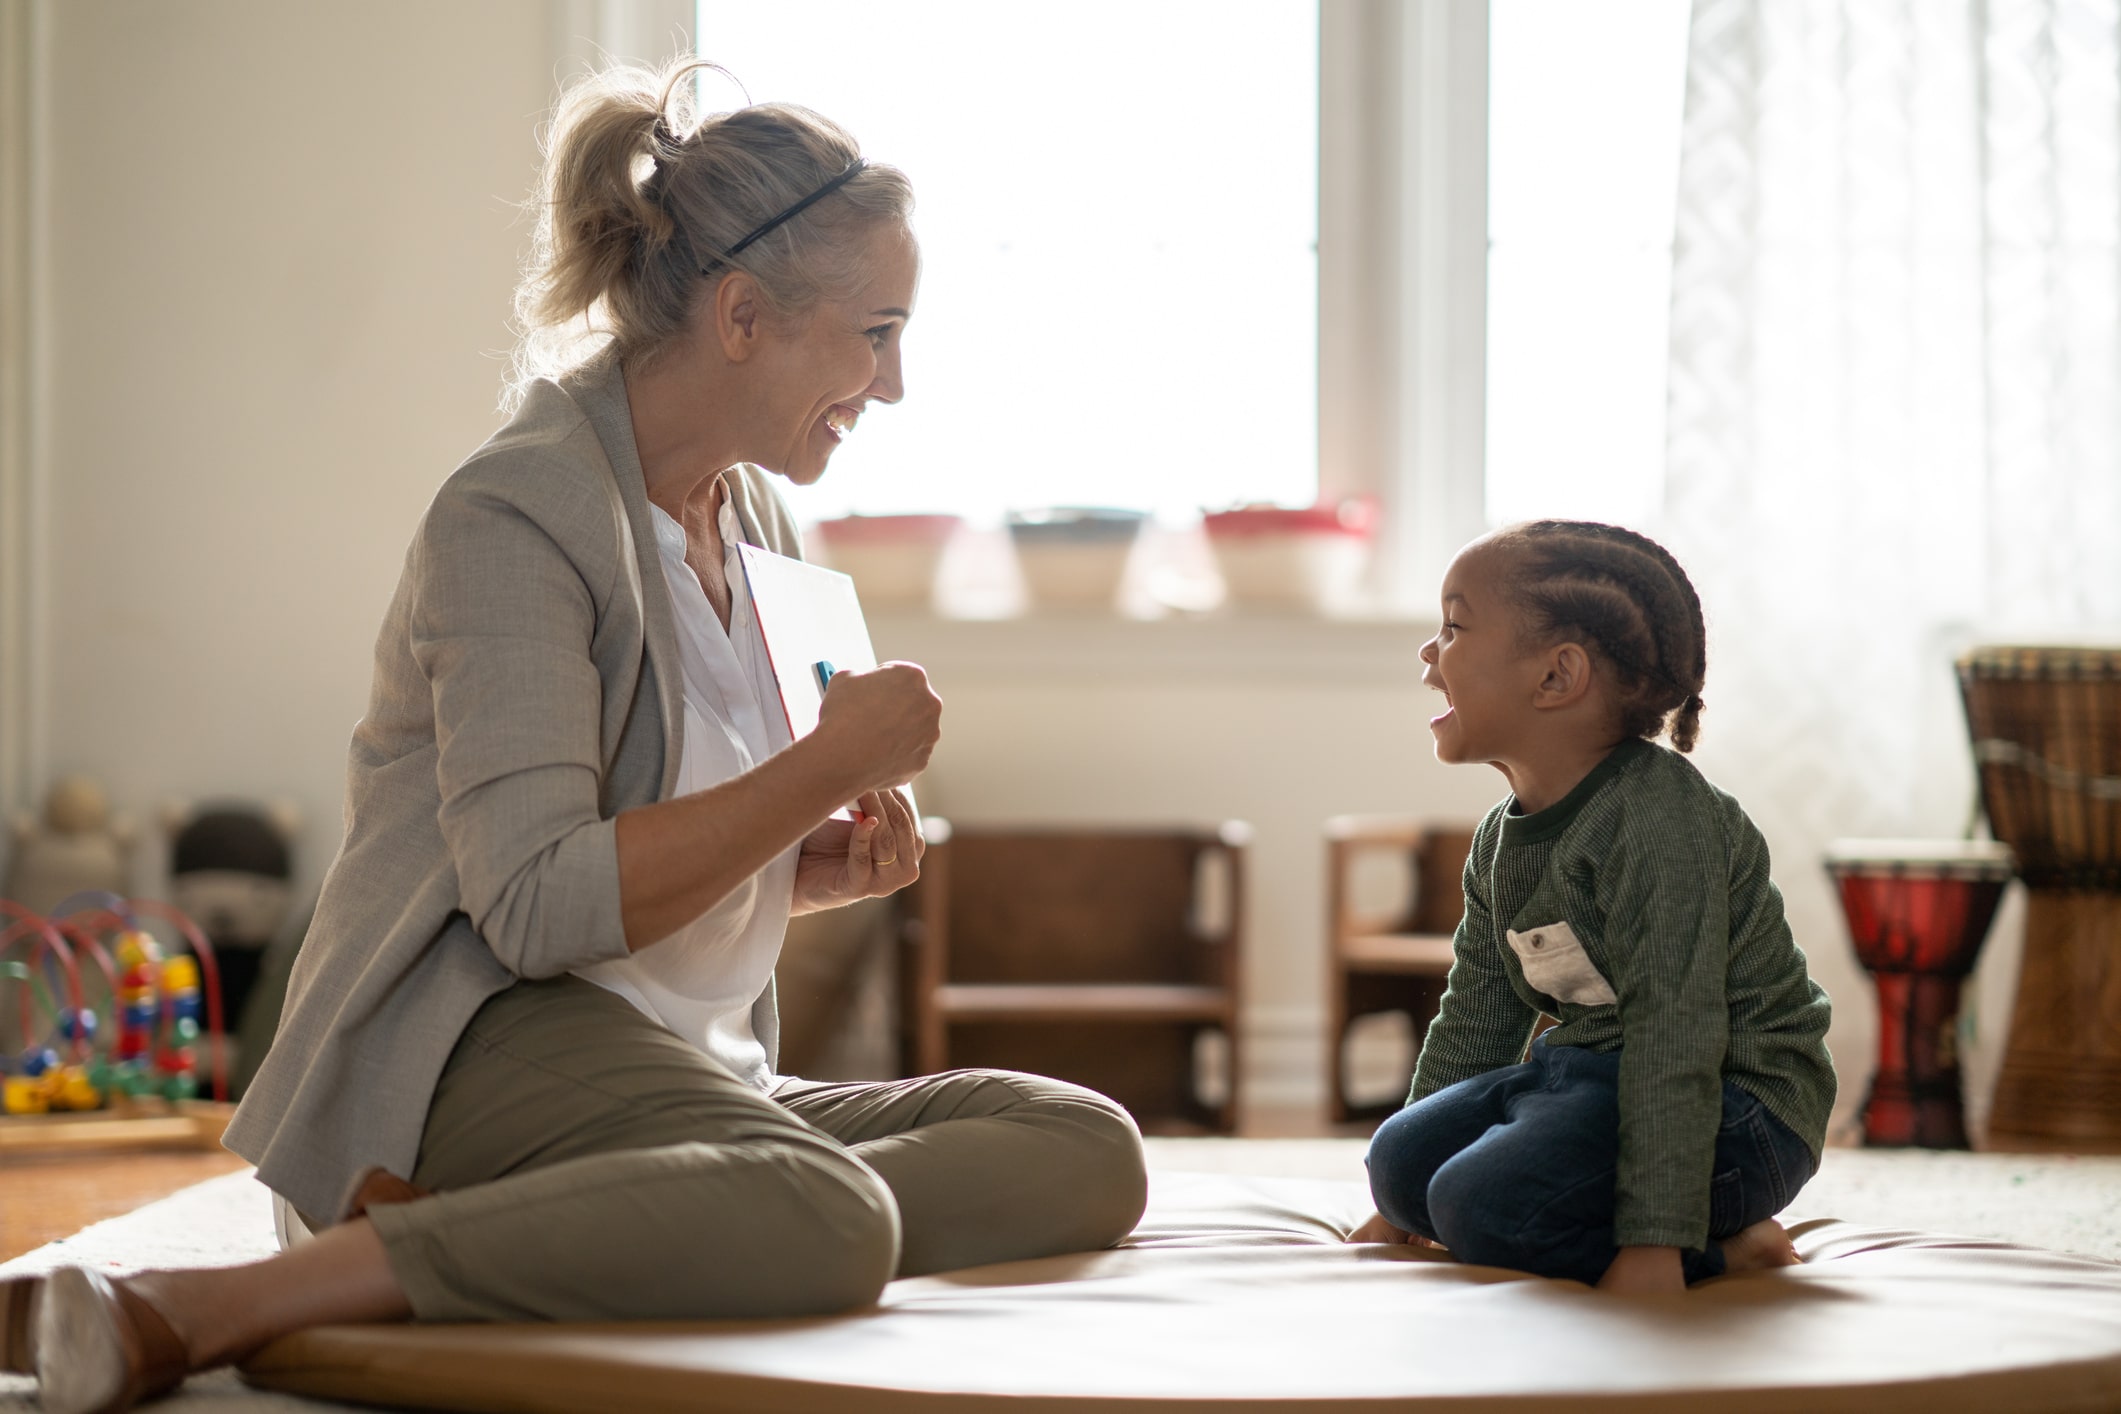 Speech therapist sitting on the floor with young child during an in-home speech therapy session